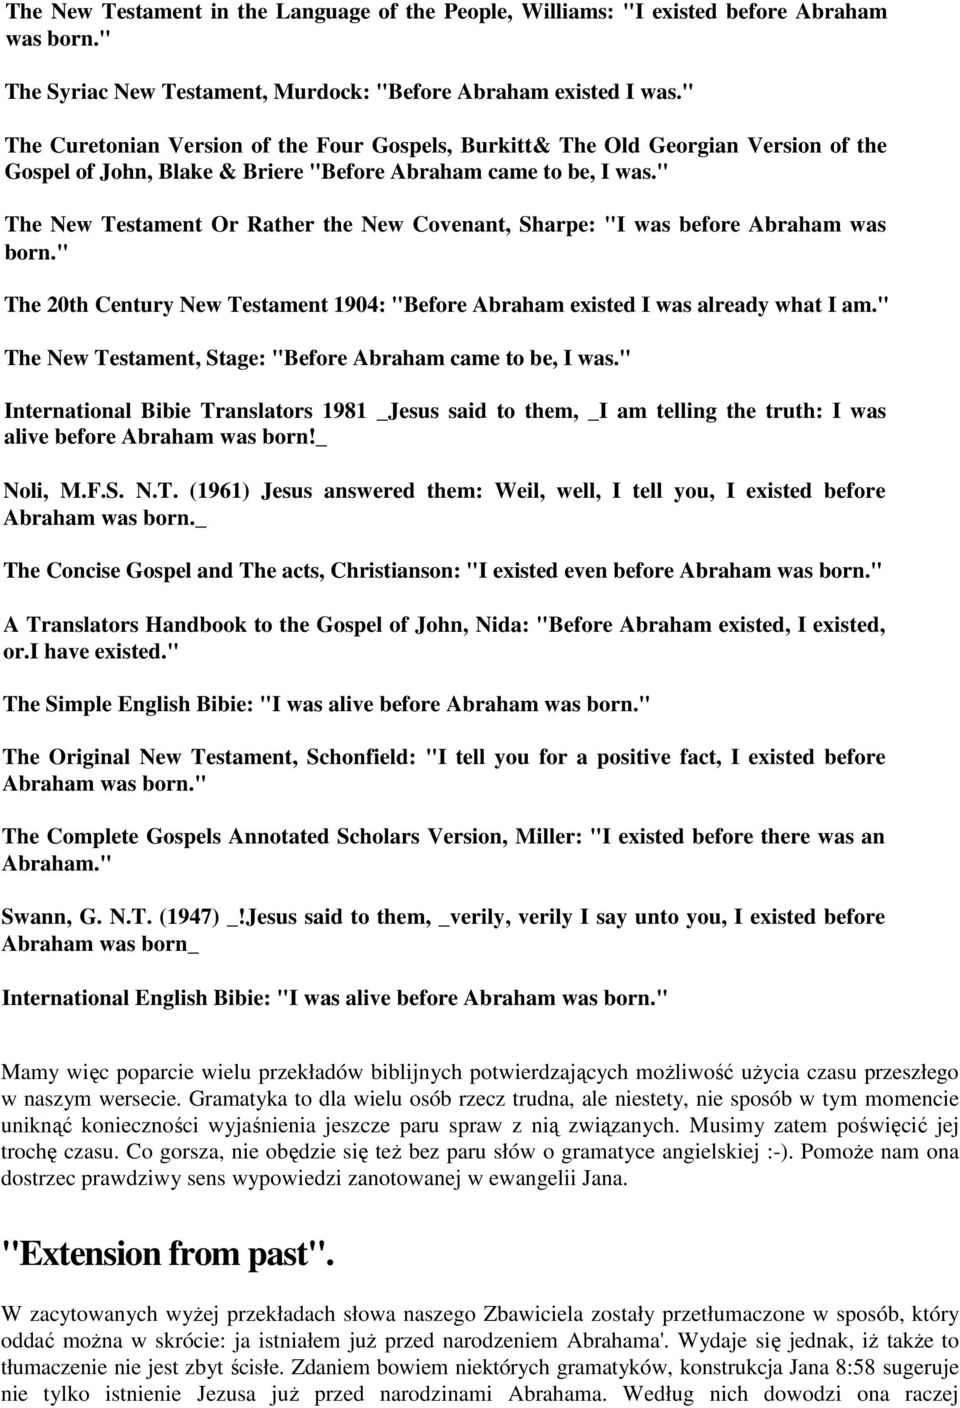 " The New Testament Or Rather the New Covenant, Sharpe: "I was before Abraham was born." The 20th Century New Testament 1904: "Before Abraham existed I was already what I am.